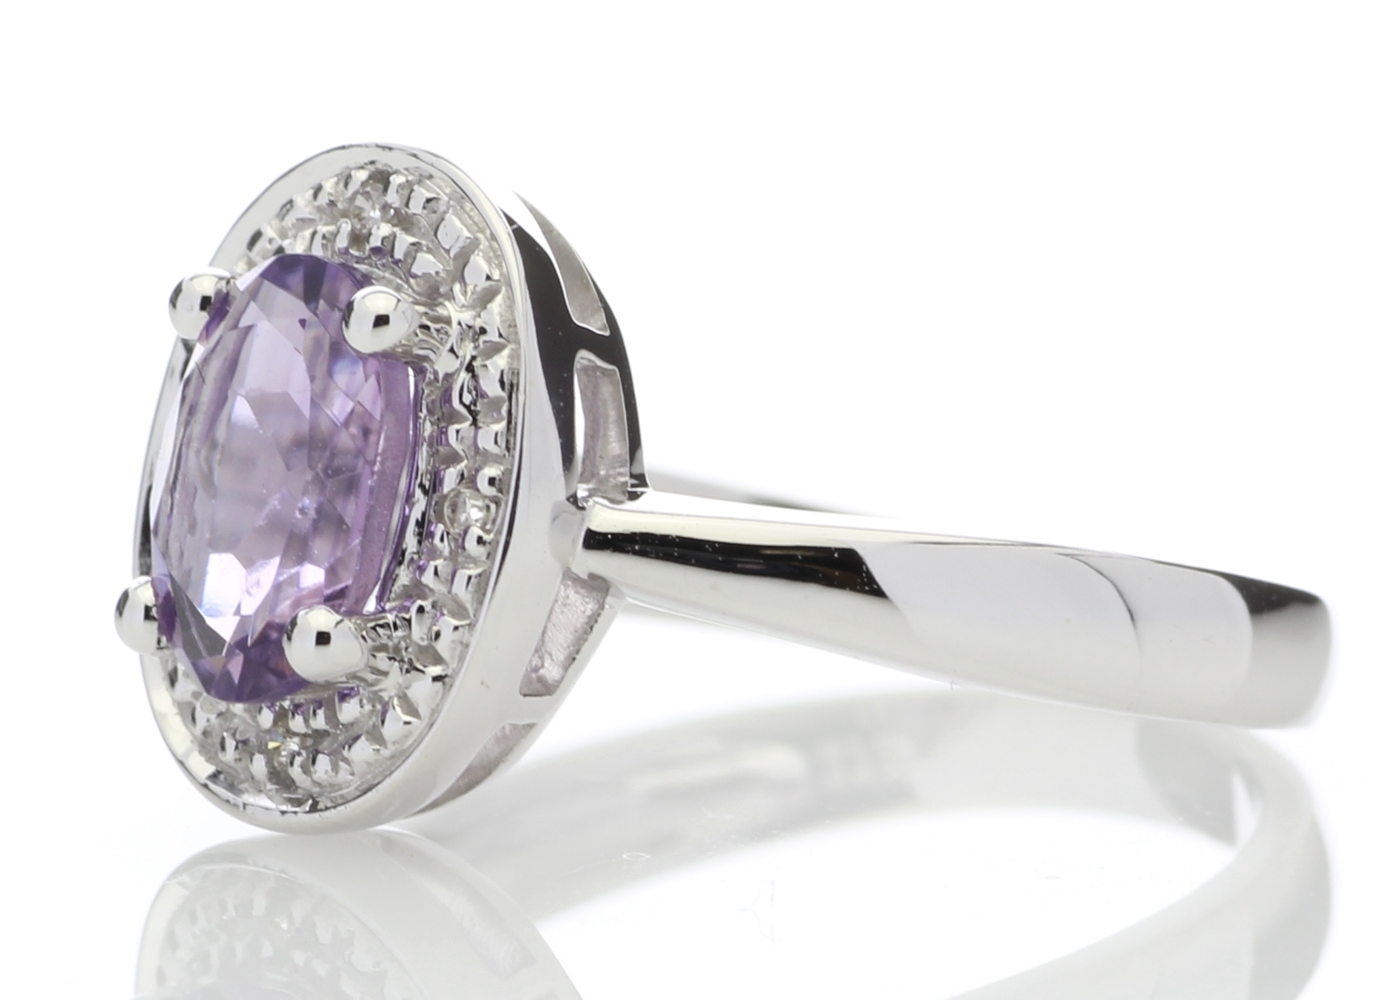 9ct White Gold Cluster Diamond Amethyst Ring (A1.13) 0.02 Carats - Image 2 of 5